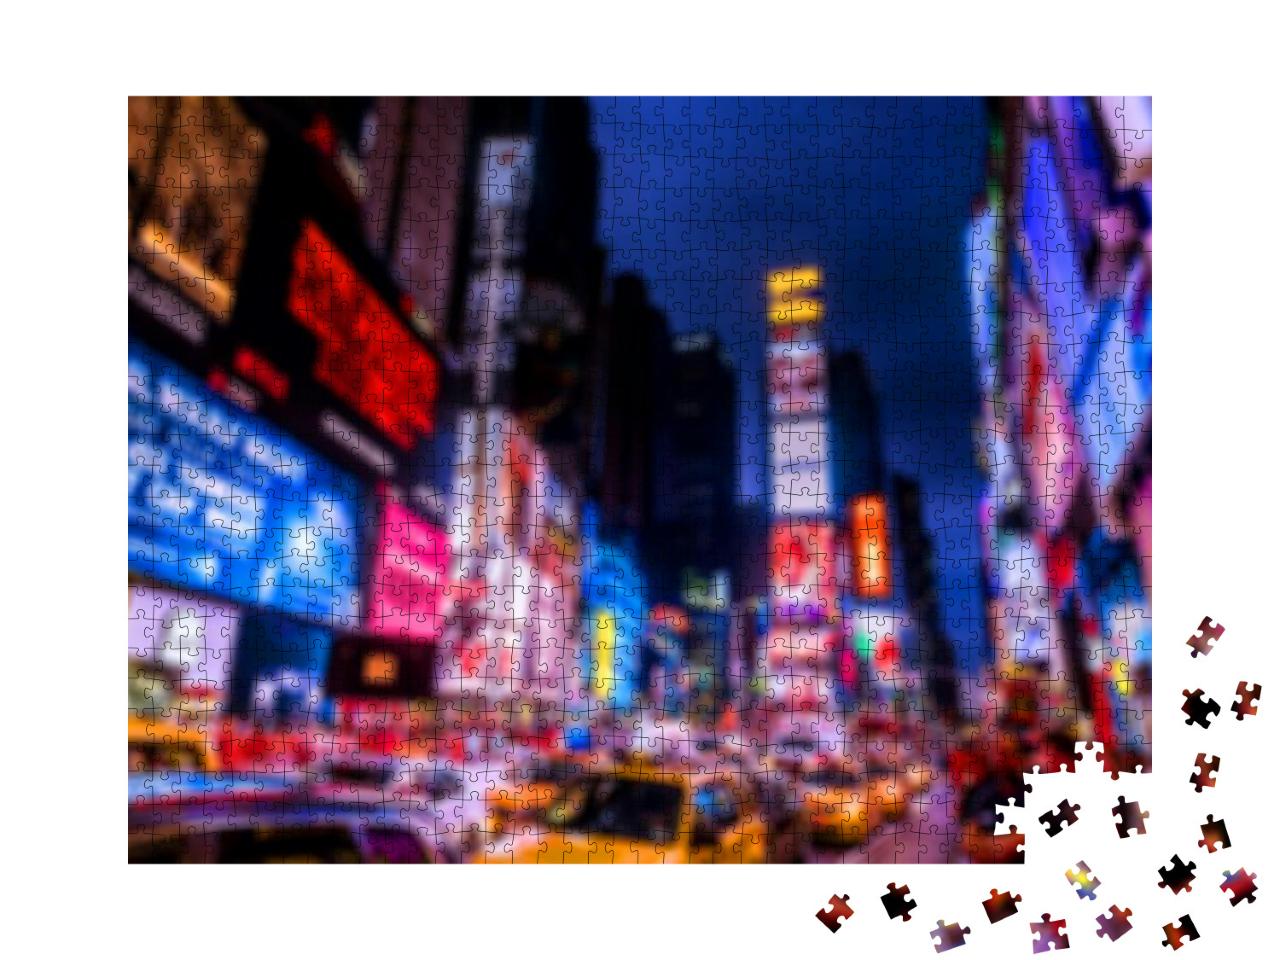 Blurred Image of Times Square. Times Square is a Major Co... Jigsaw Puzzle with 1000 pieces